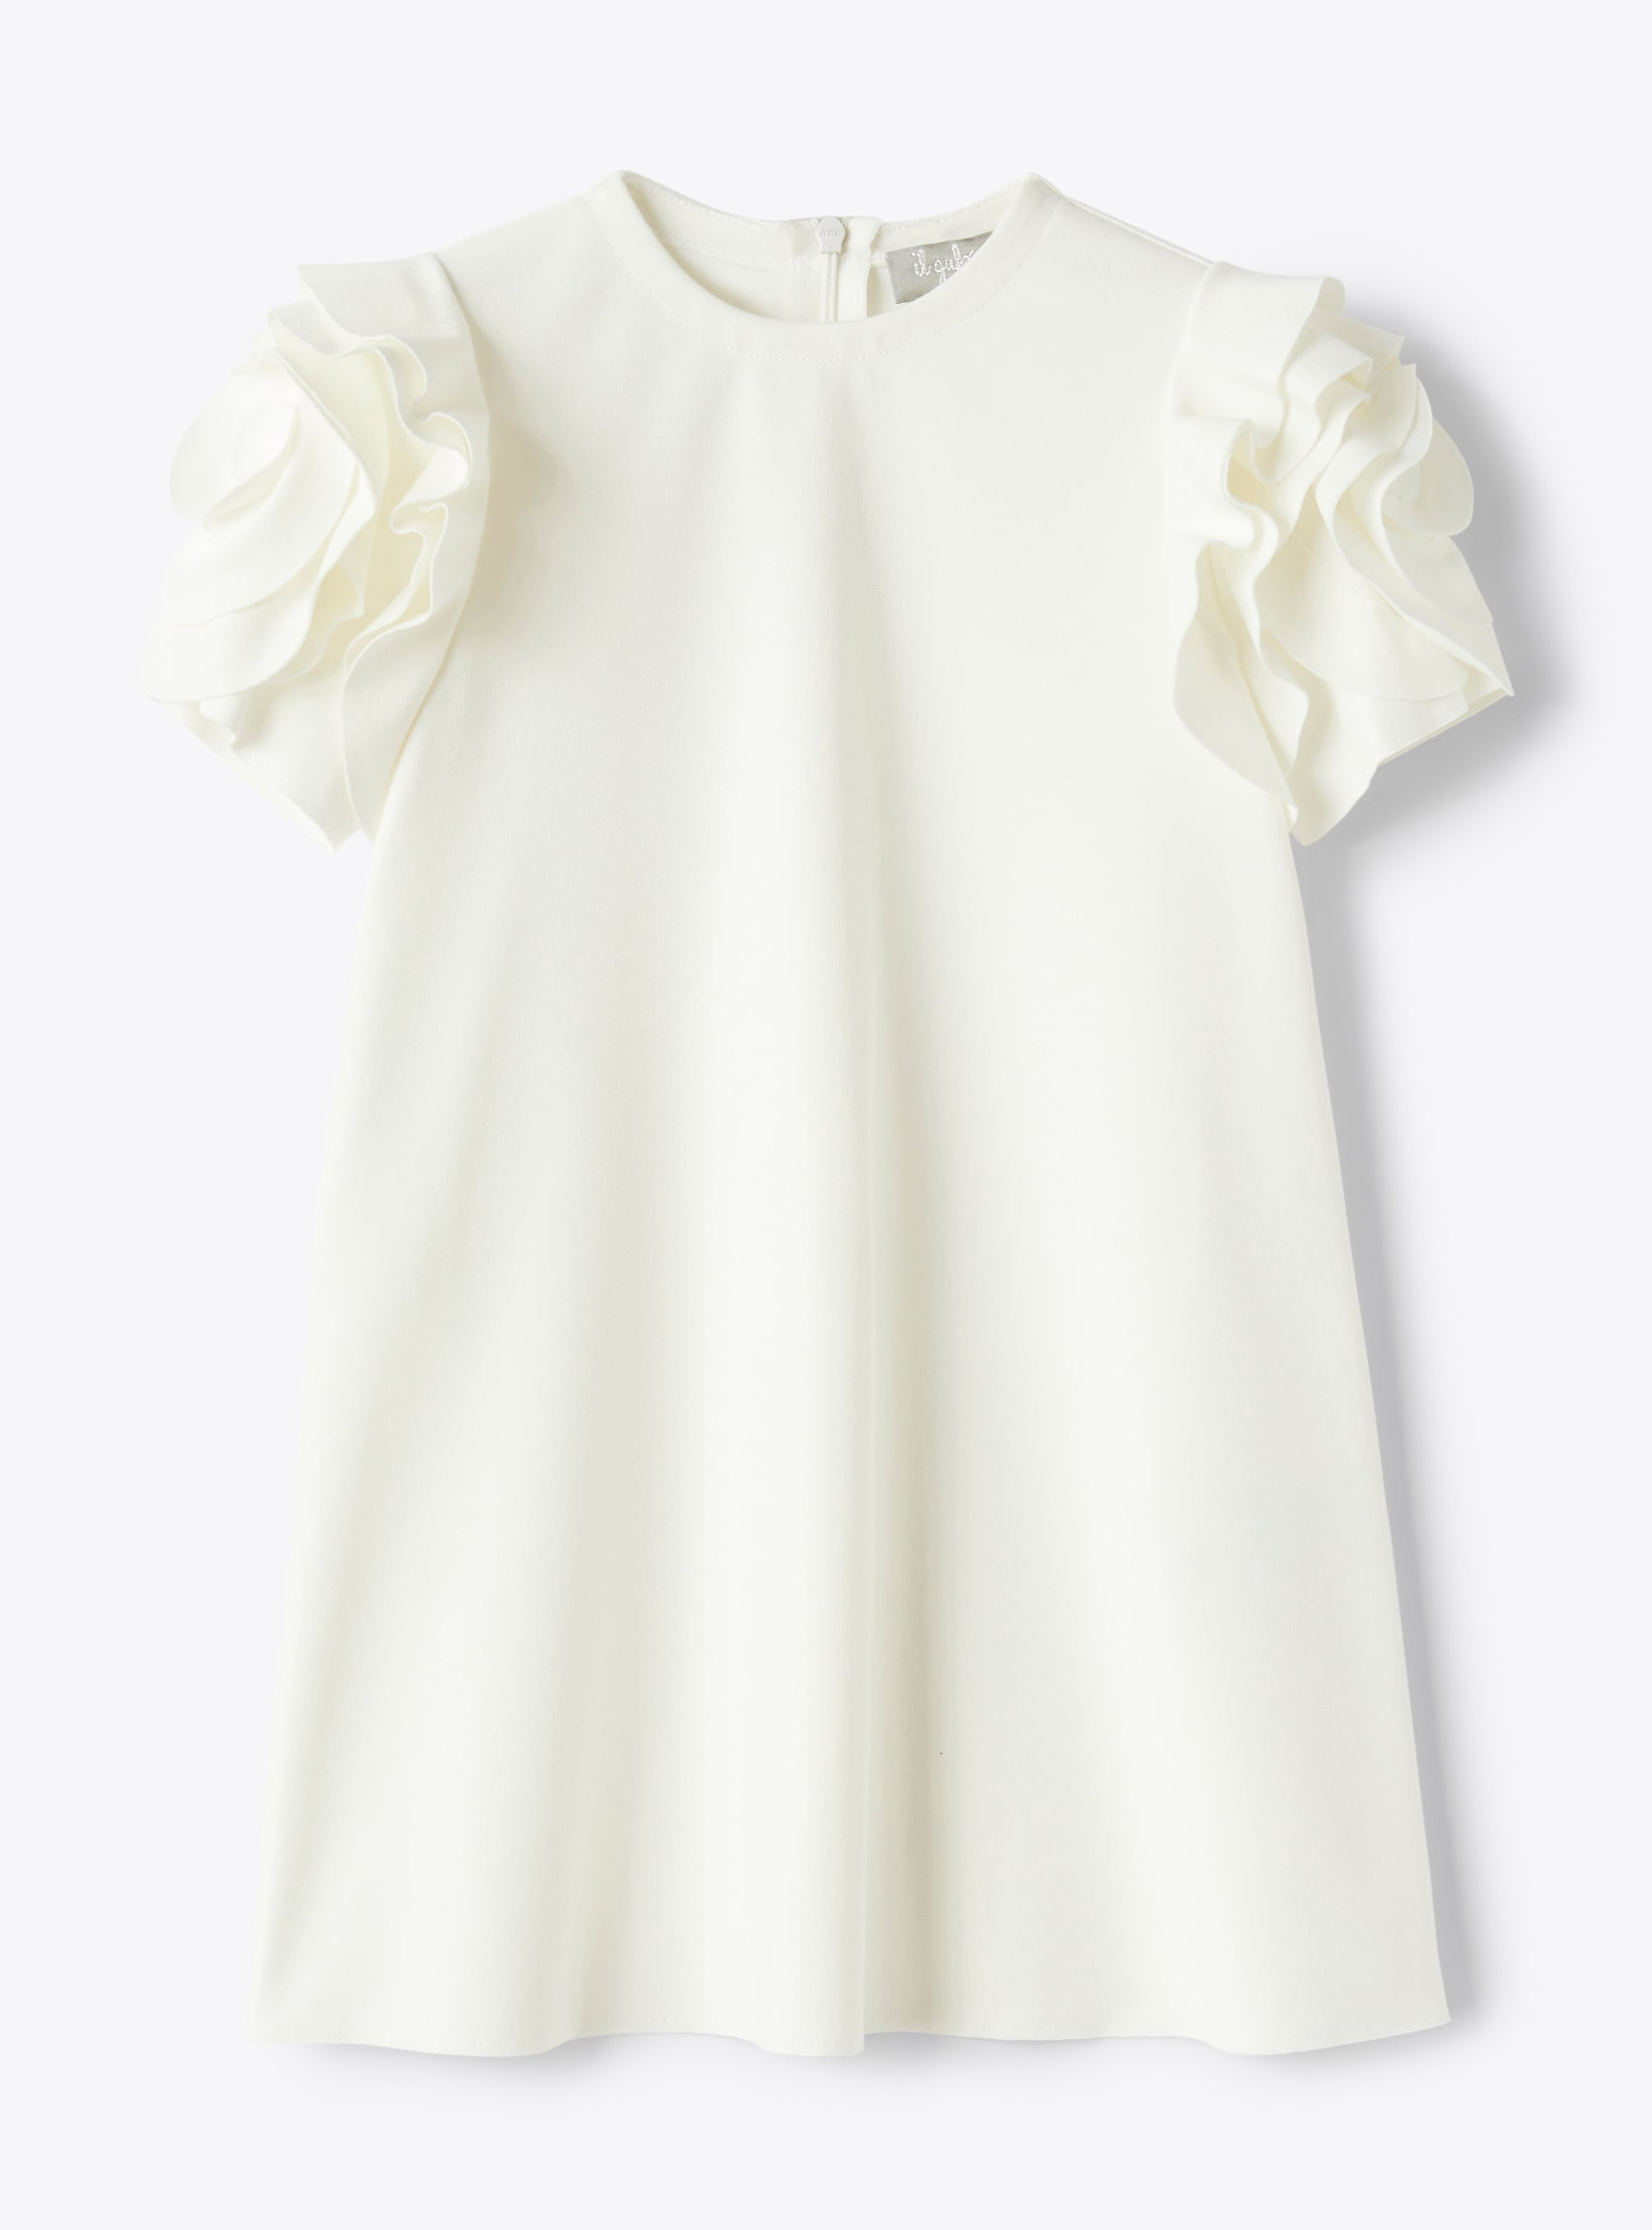 Dress in Milano stitch with ruffle detailing - Dresses - Il Gufo